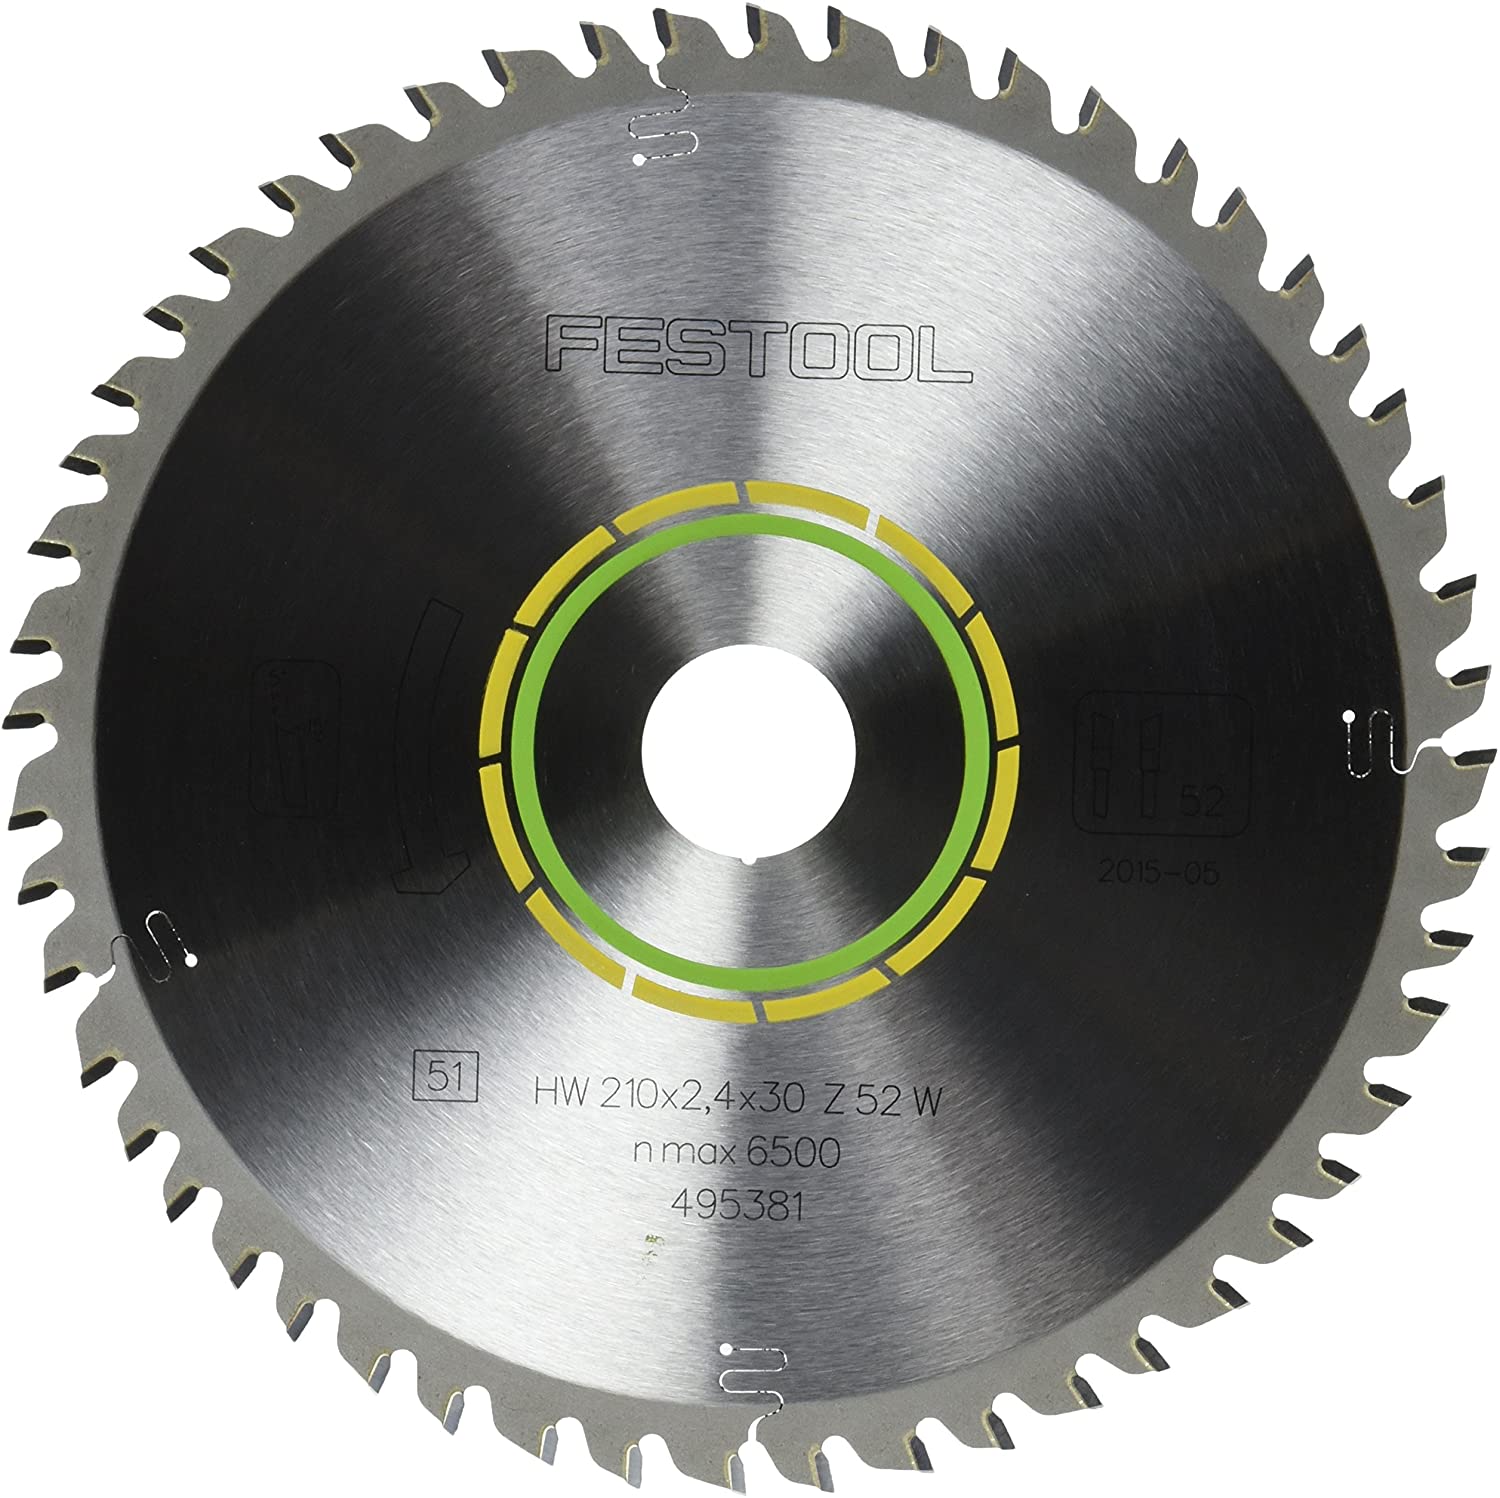 Festool 495381 Fine Tooth Cross-Cut Saw Blade for TS 75 Plunge Cut Saw –  Tool Factory Outlet